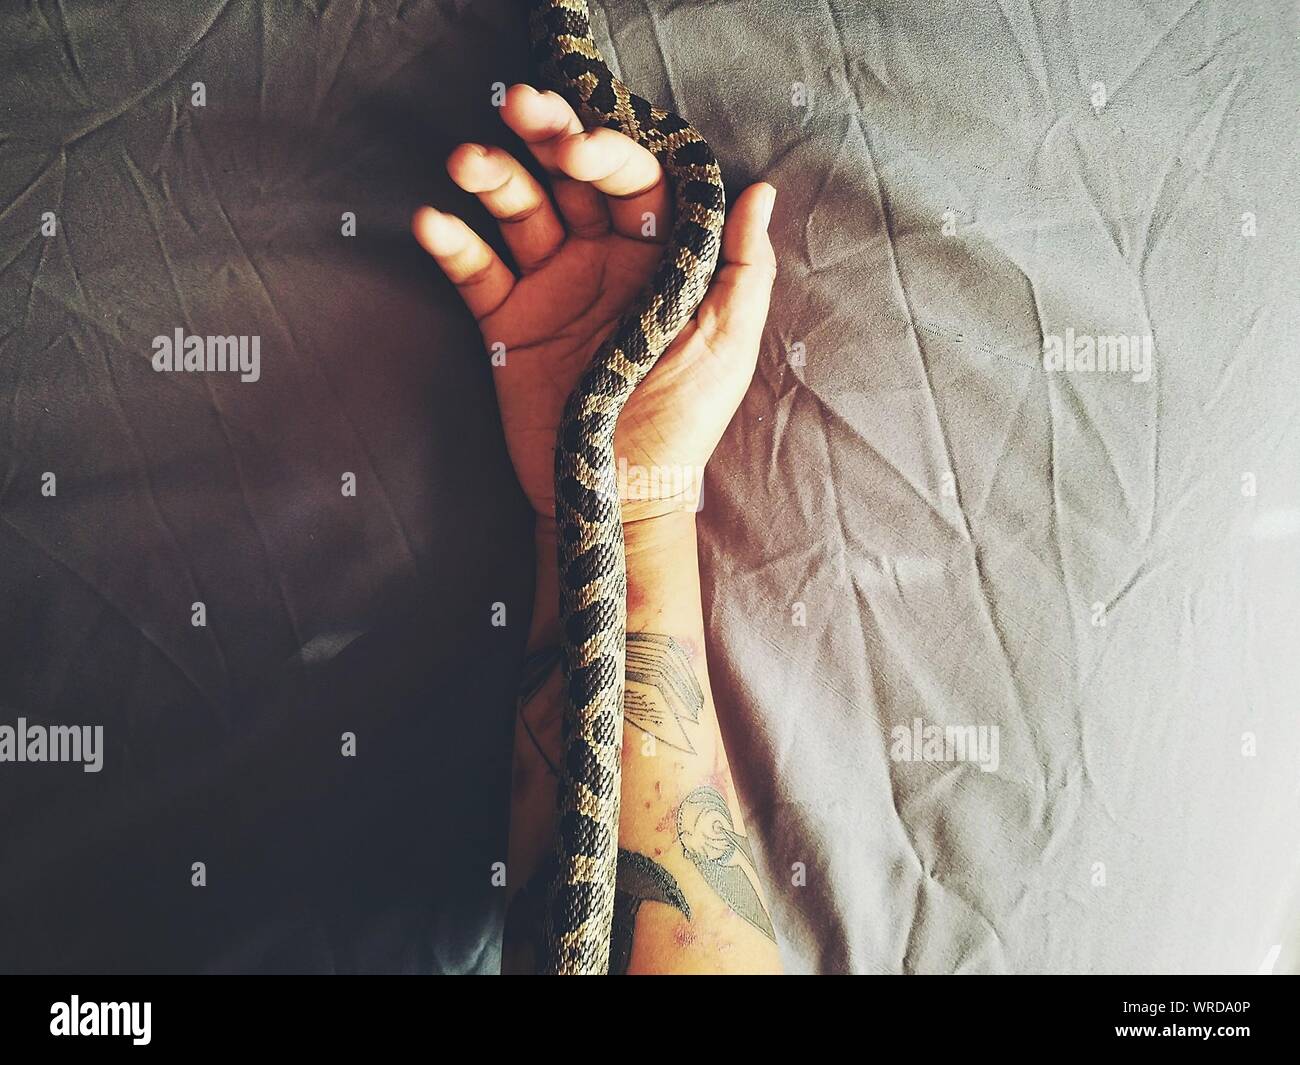 High Angle View Of Snake On Tattooed Hand Stock Photo